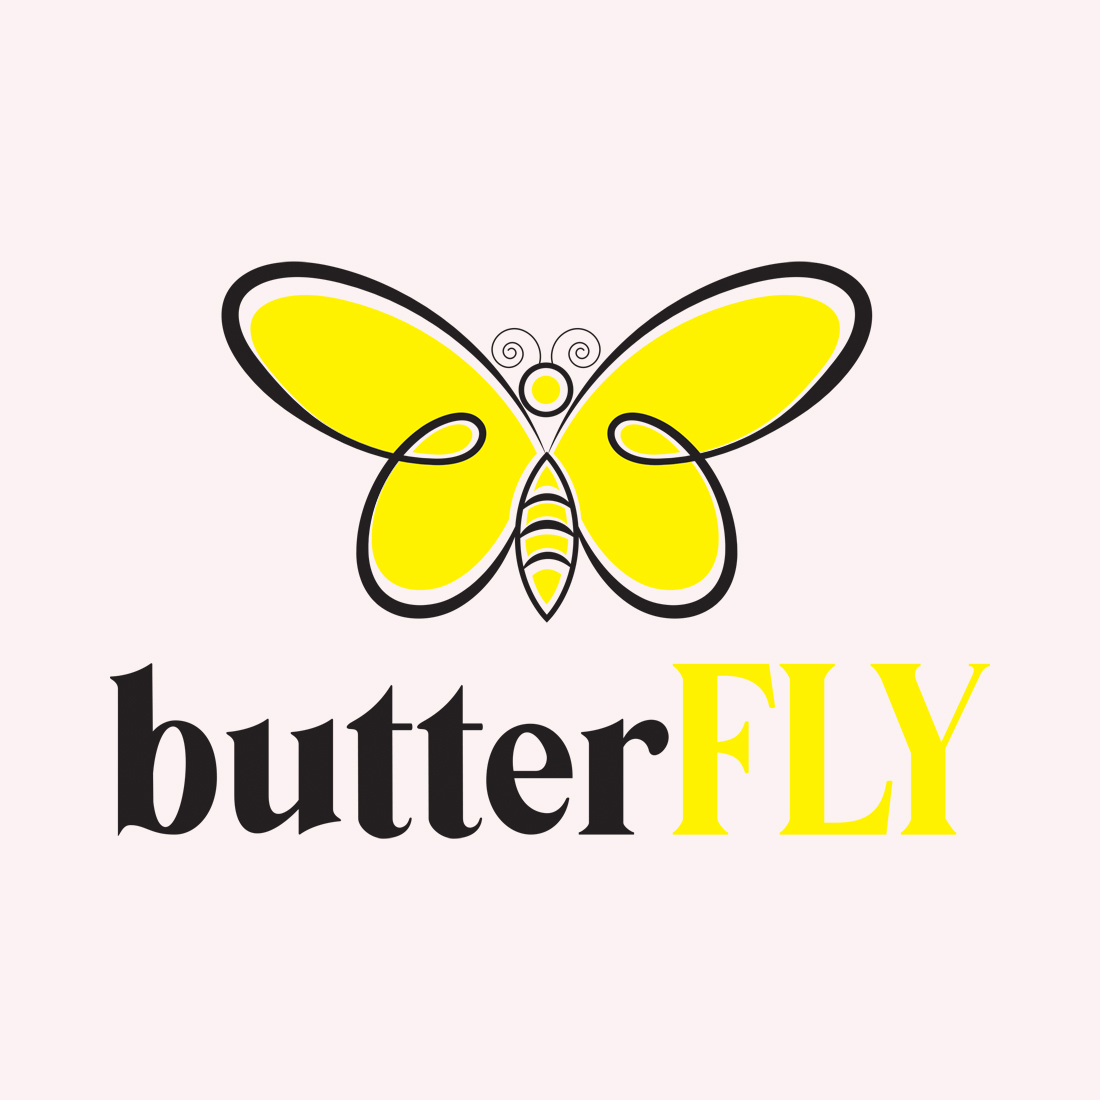 Light butterfly logo template for your company.